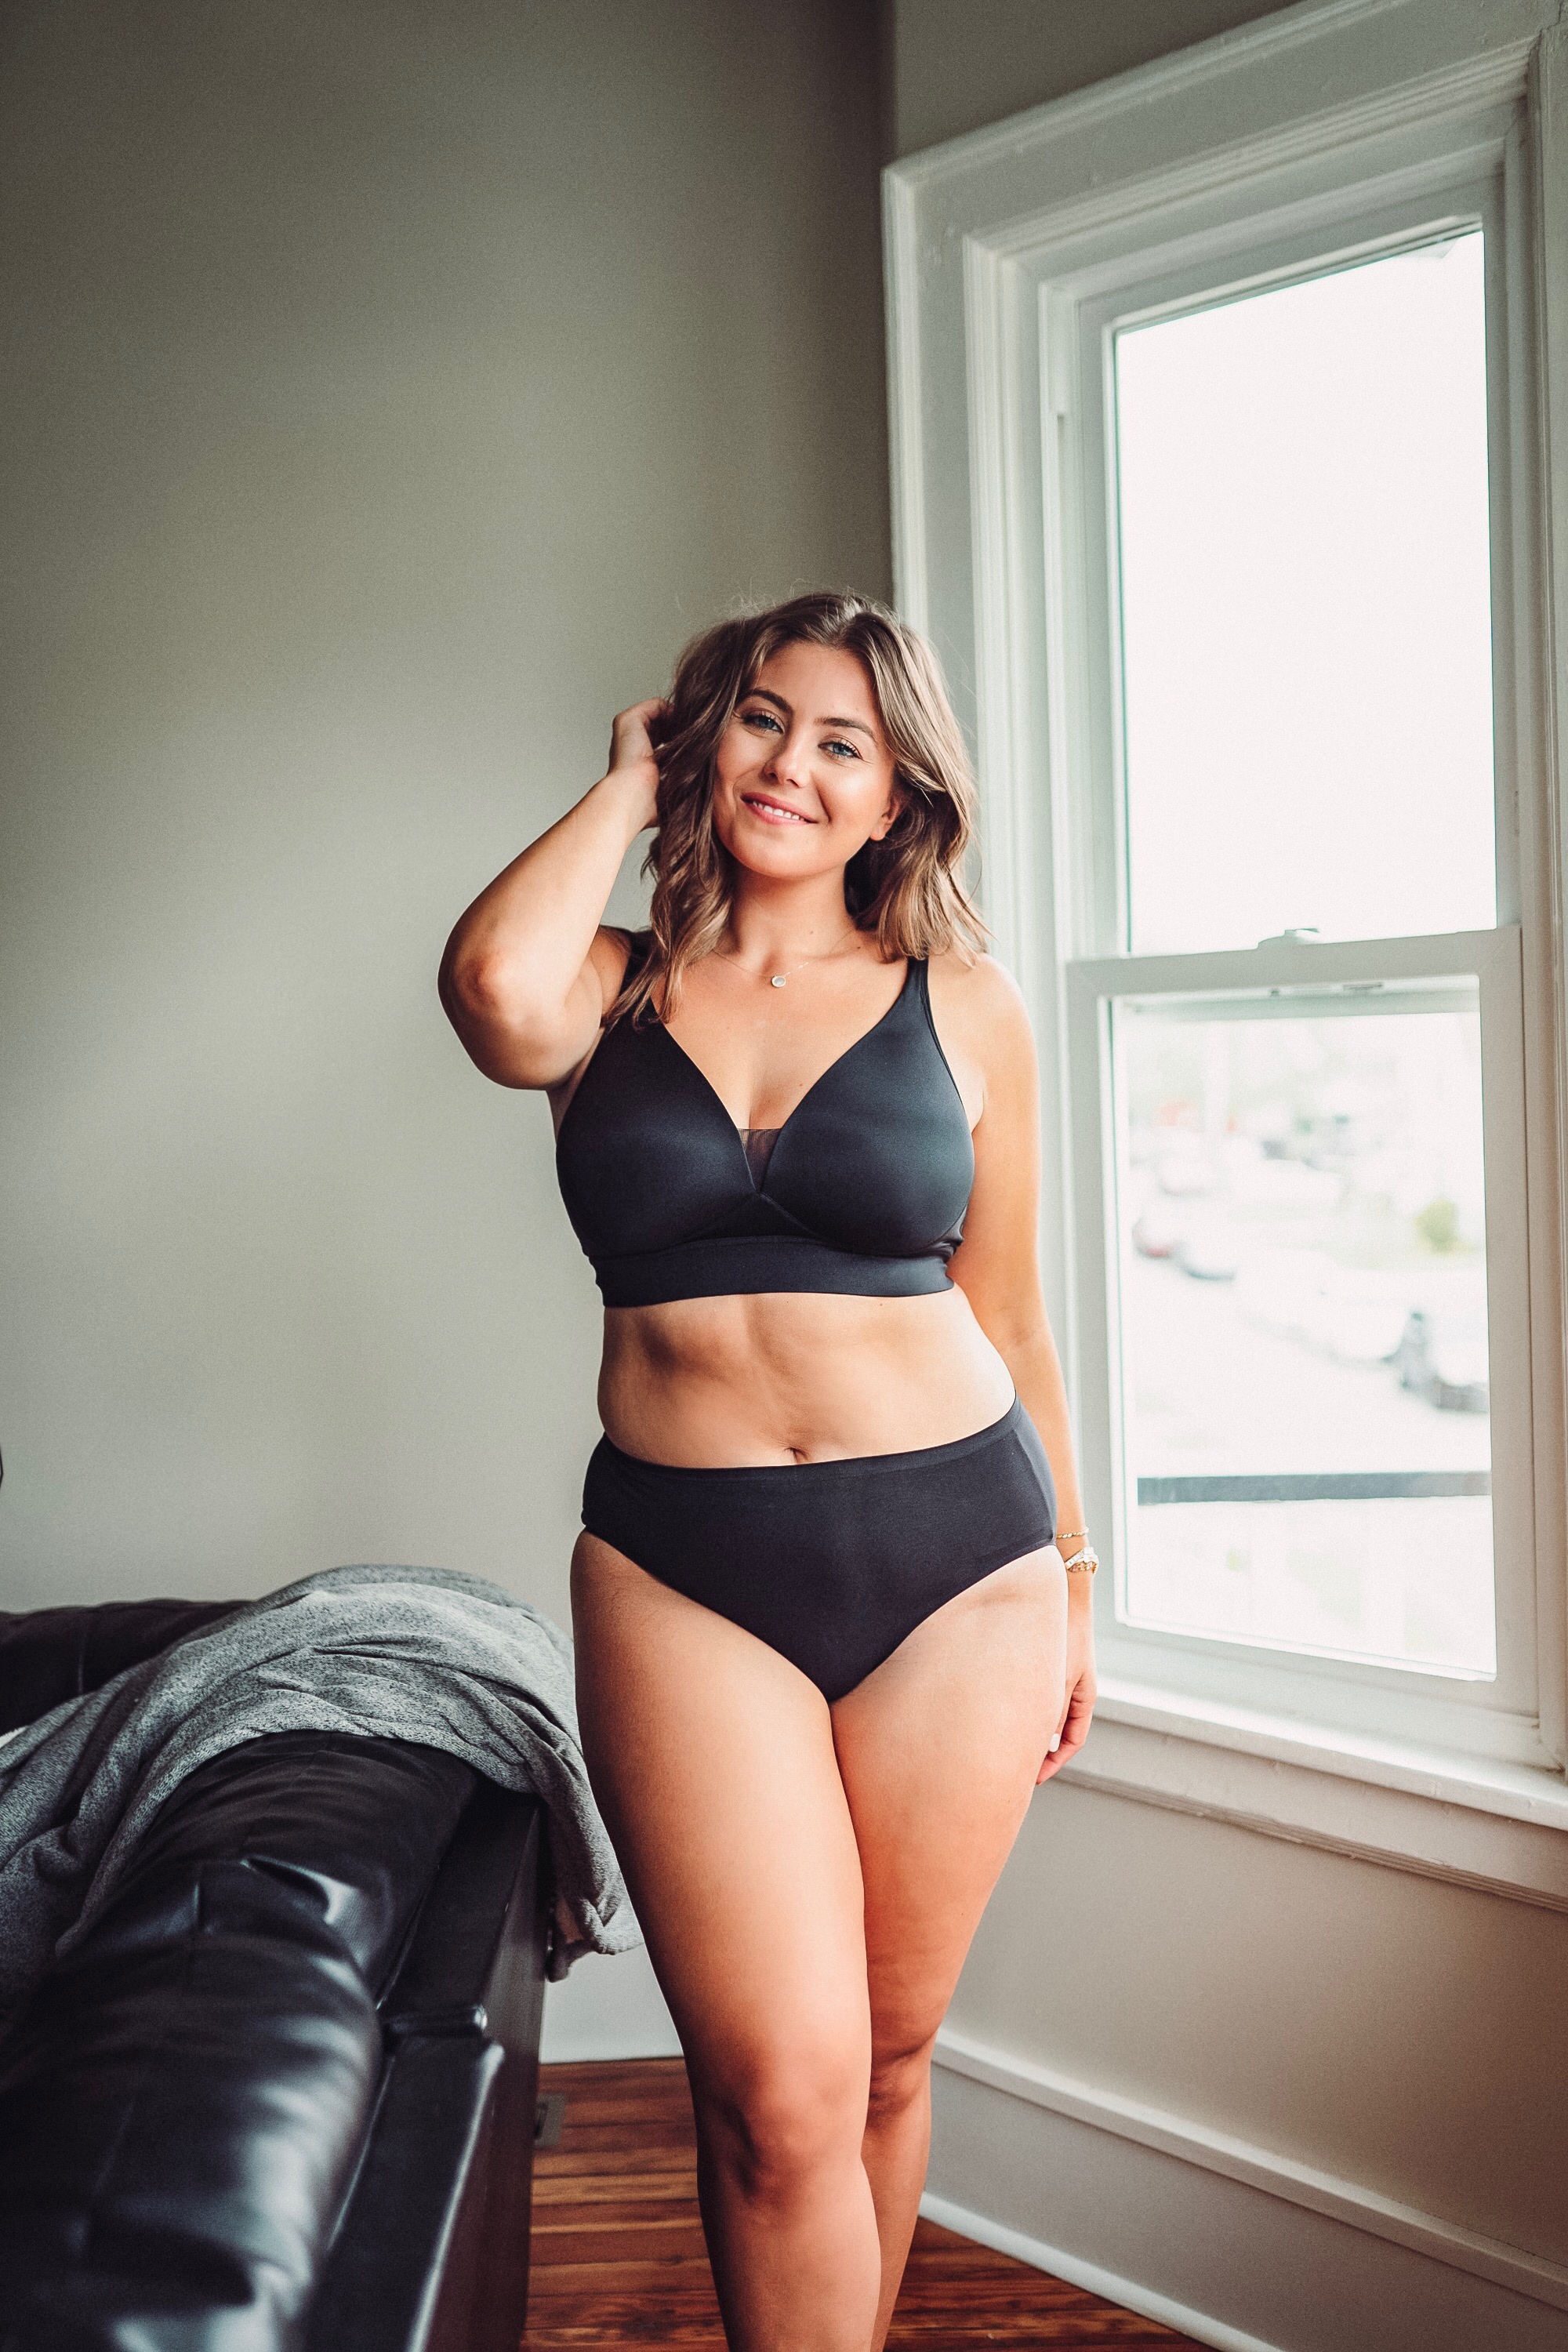 The Comfy Bra of Your Dreams: Jockey Forever Fit — Caralyn Mirand Koch